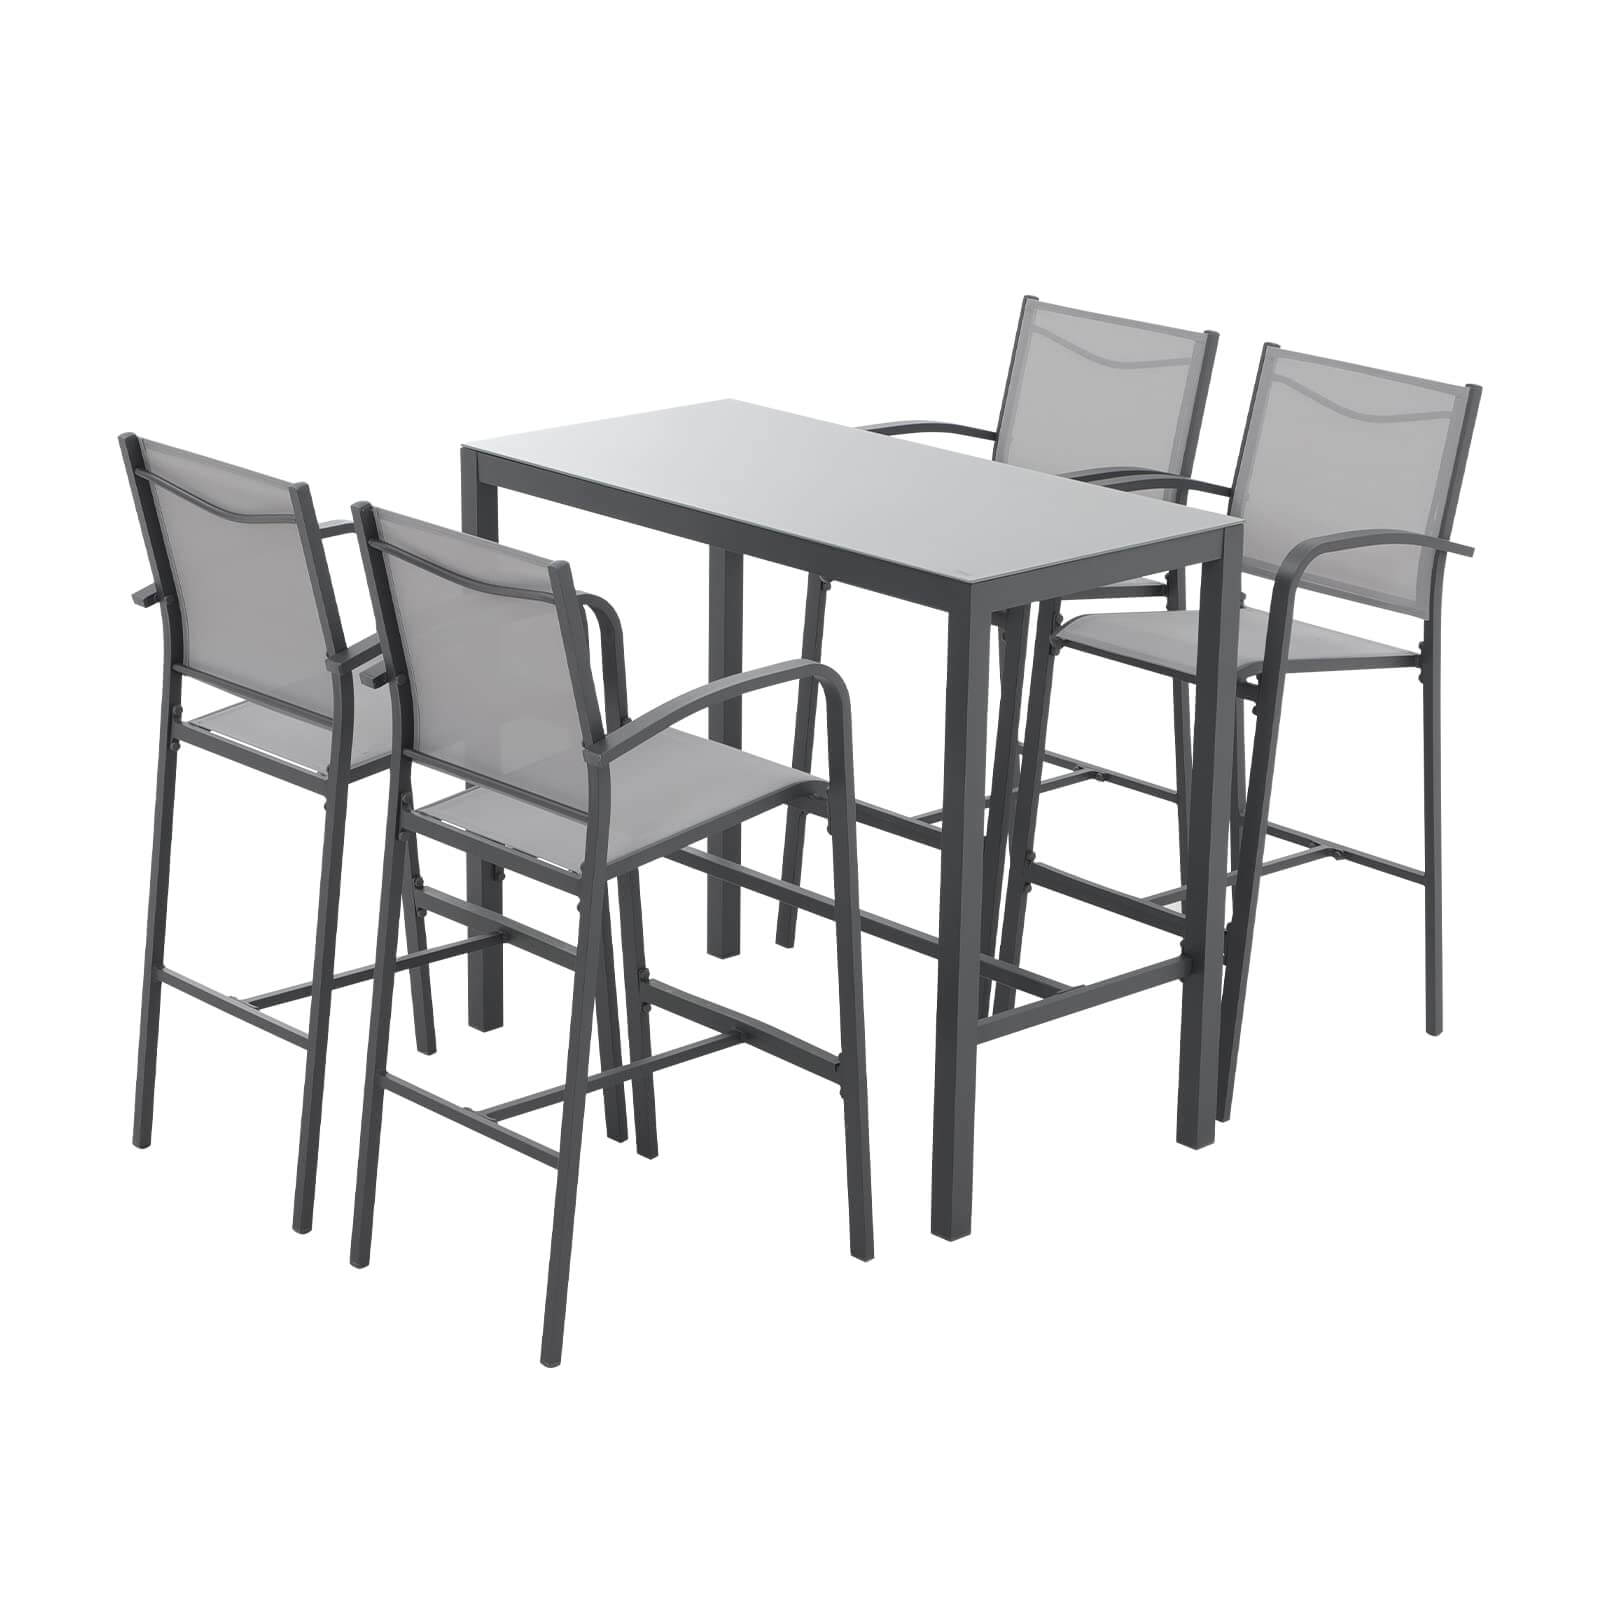 5-Piece Patio Bar Set, All-Weather Aluminum Textile Fabric Outdoor Dining Table and Chairs